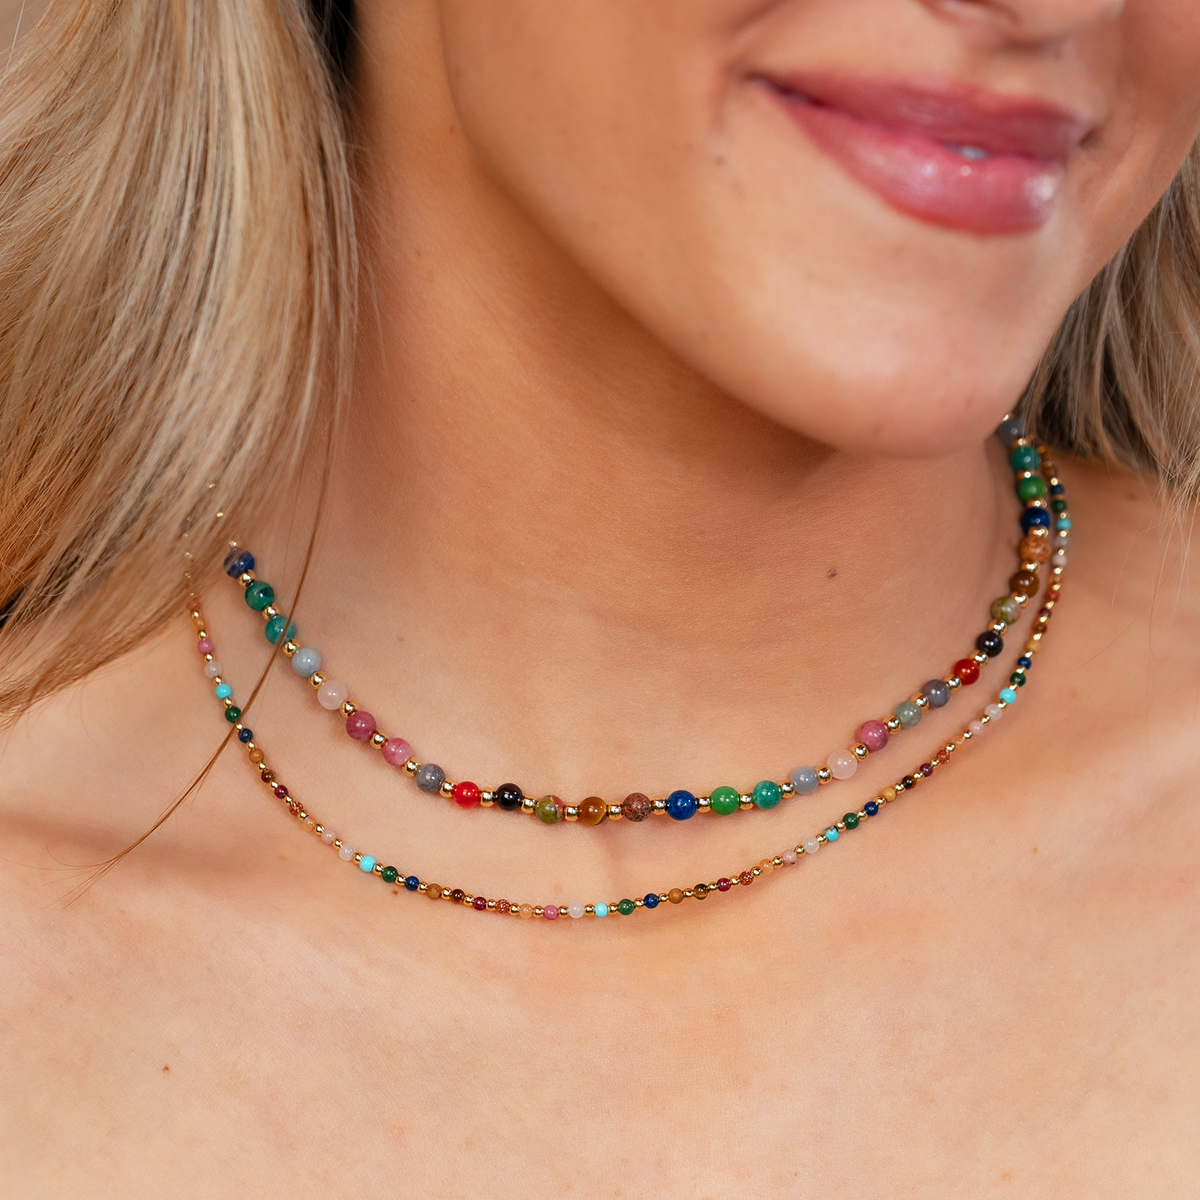 Model wearing a healing necklace stack. The necklaces include a 2mm multicolor stone and gold bead healing necklace and a 4mm multicolor stone and gold bead healing necklace